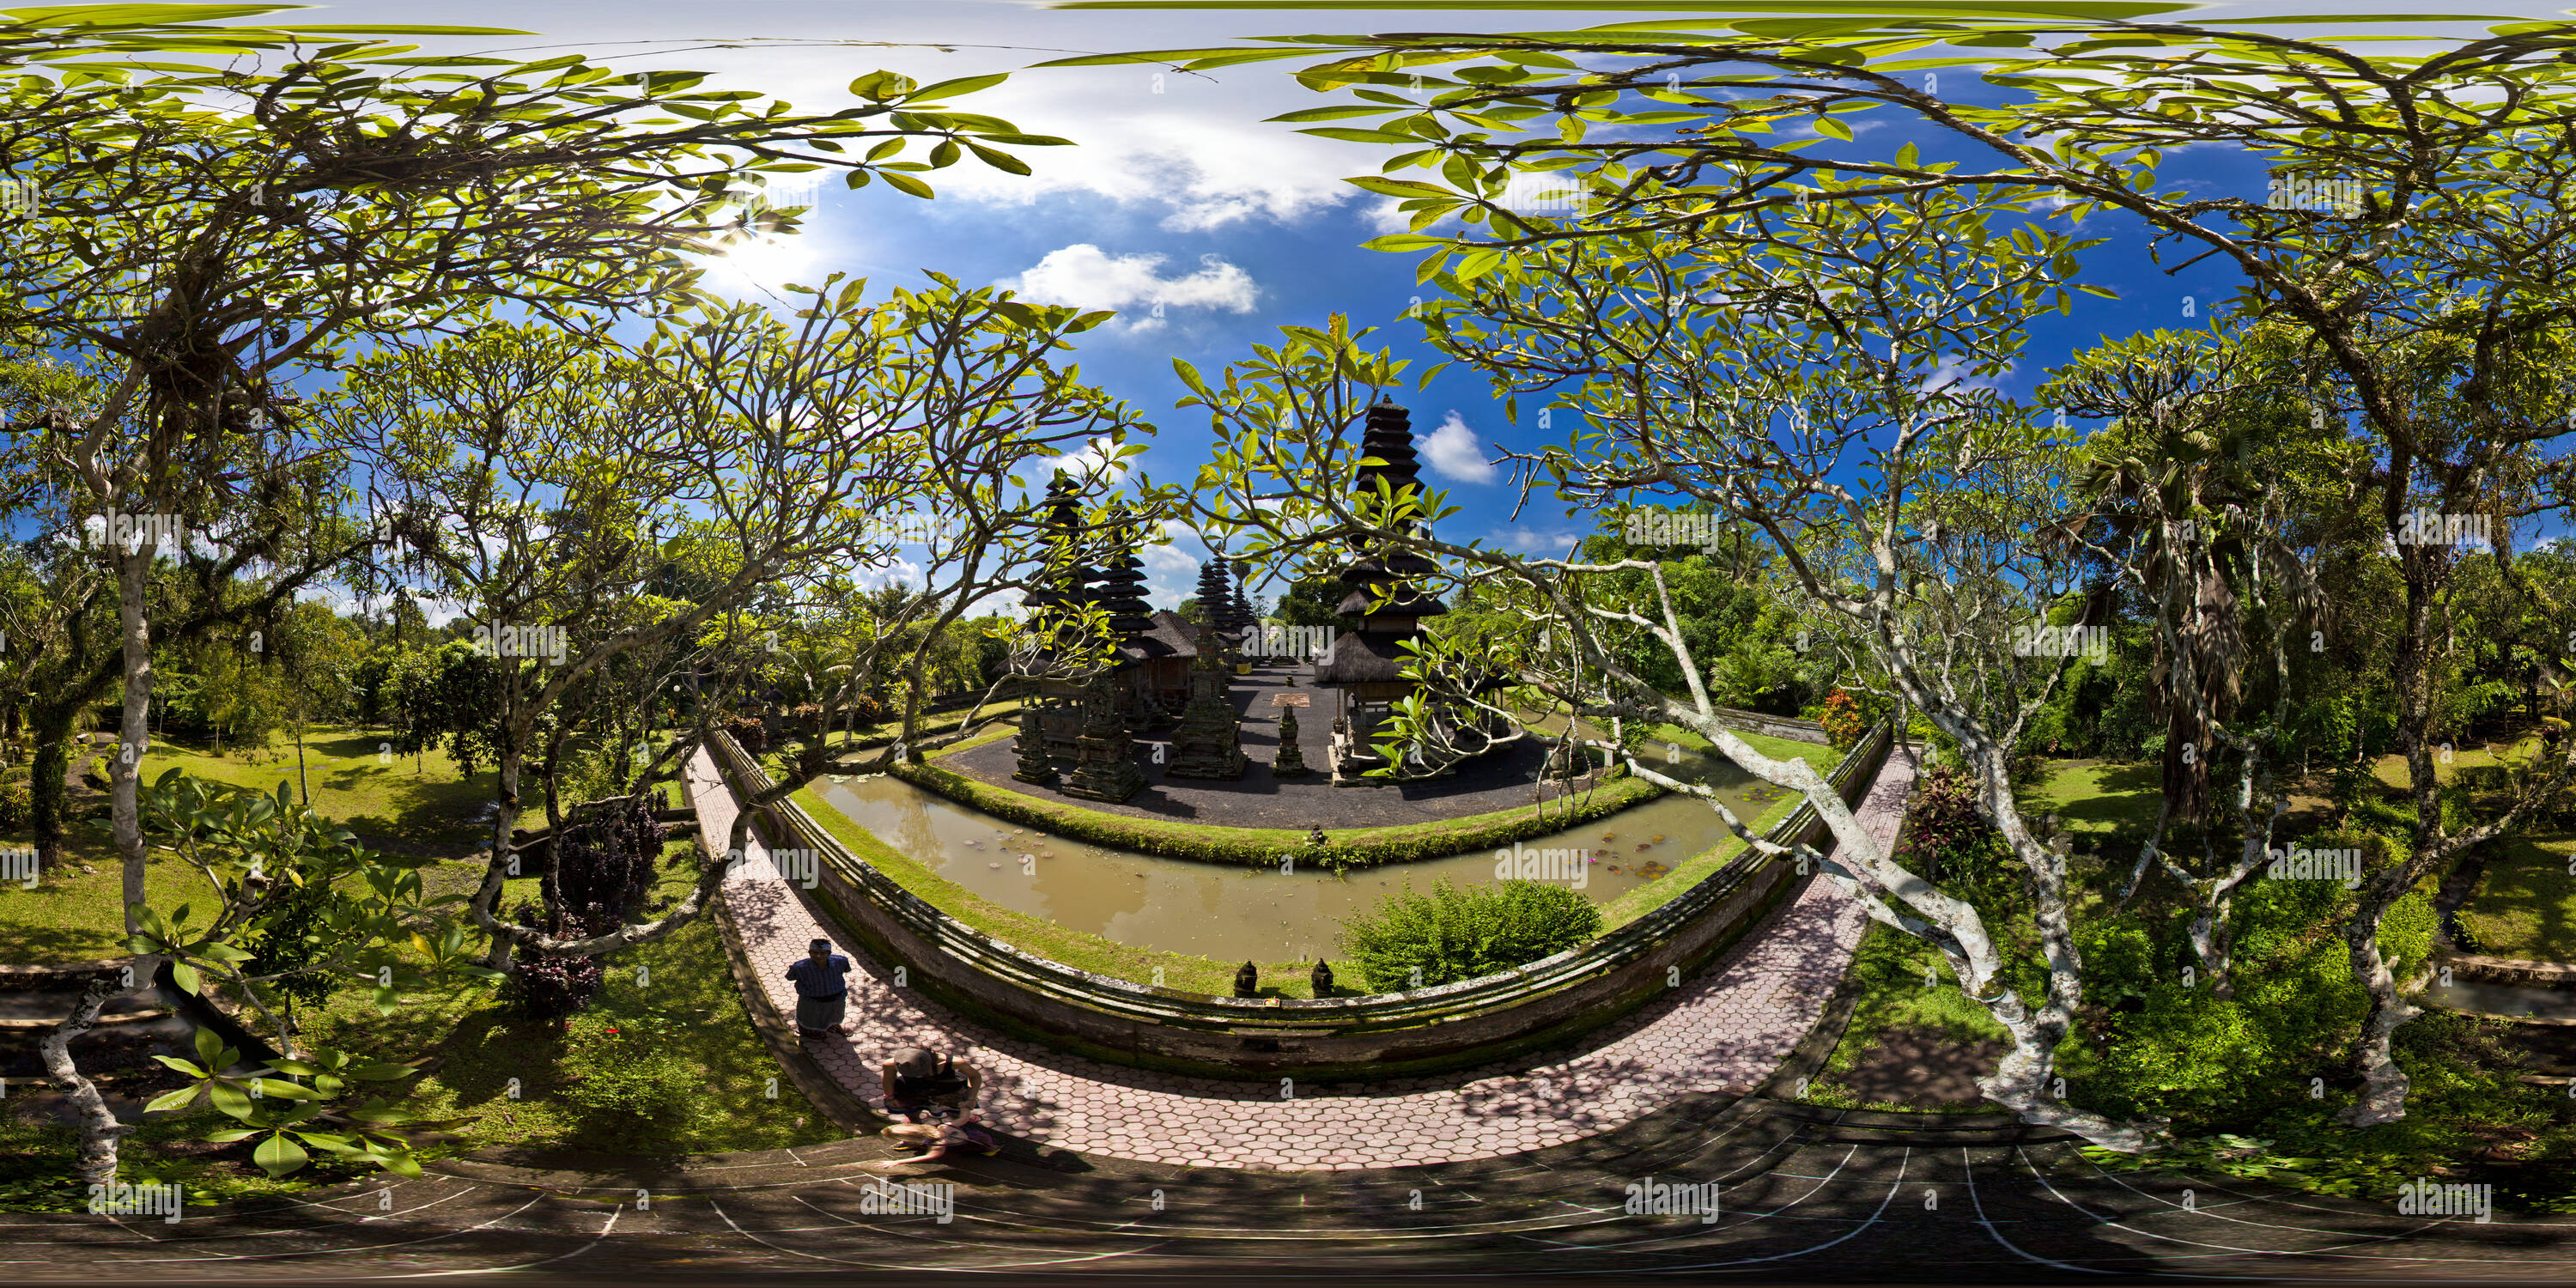 360 degree panoramic view of Mengwi Temple Garden